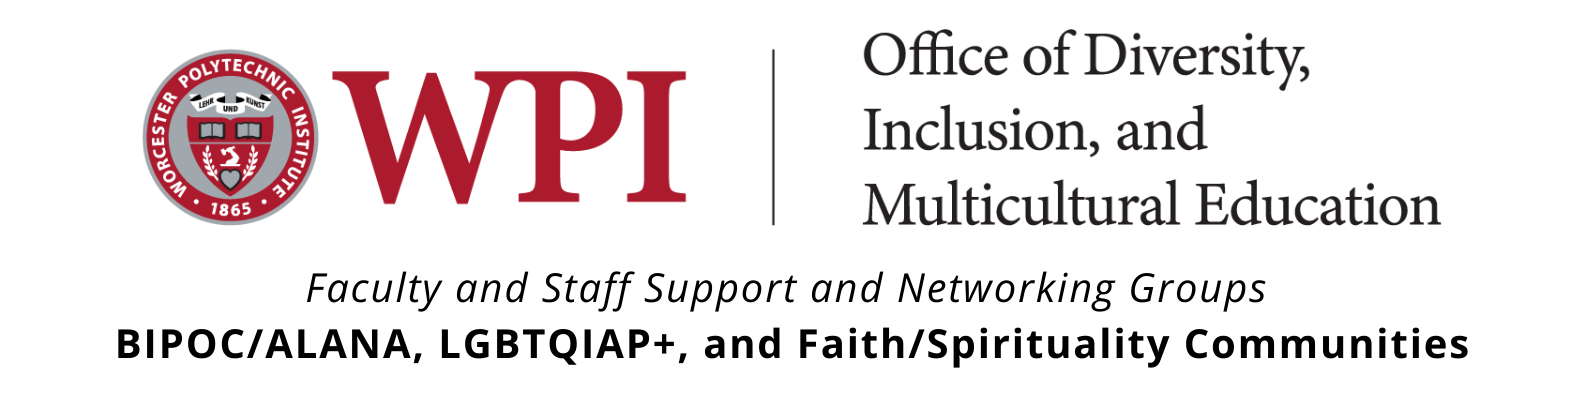 ODIME Logo with Faculty Staff Affinity Support and Networking Groups listed underneath